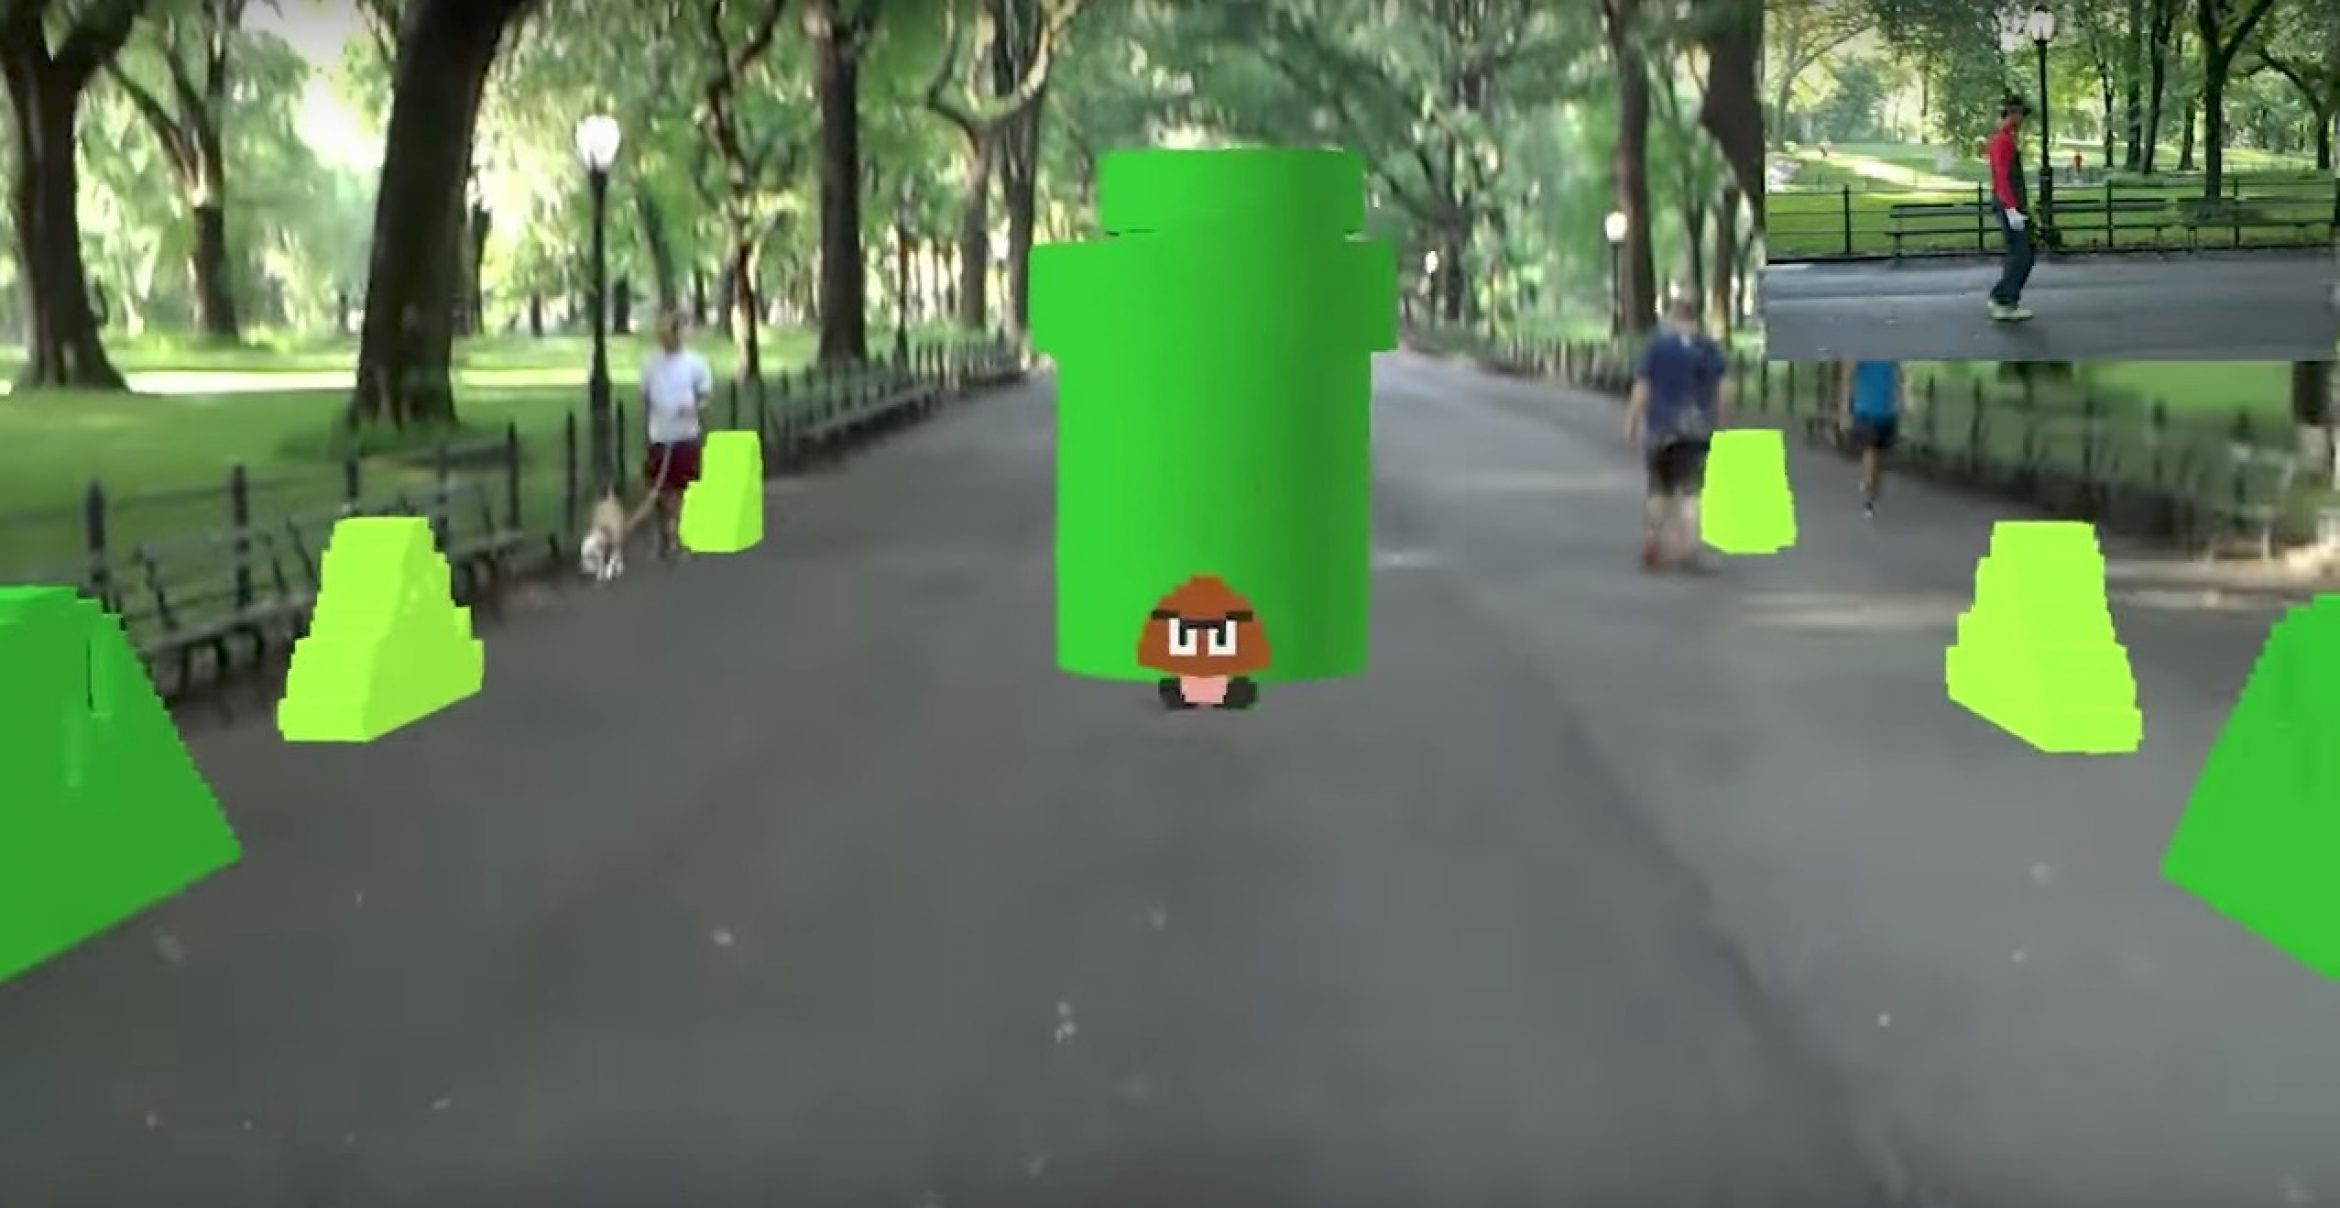 AR-Brille Hololens macht dich zu Super Mario im “Life Size Augmented Reality“ Game